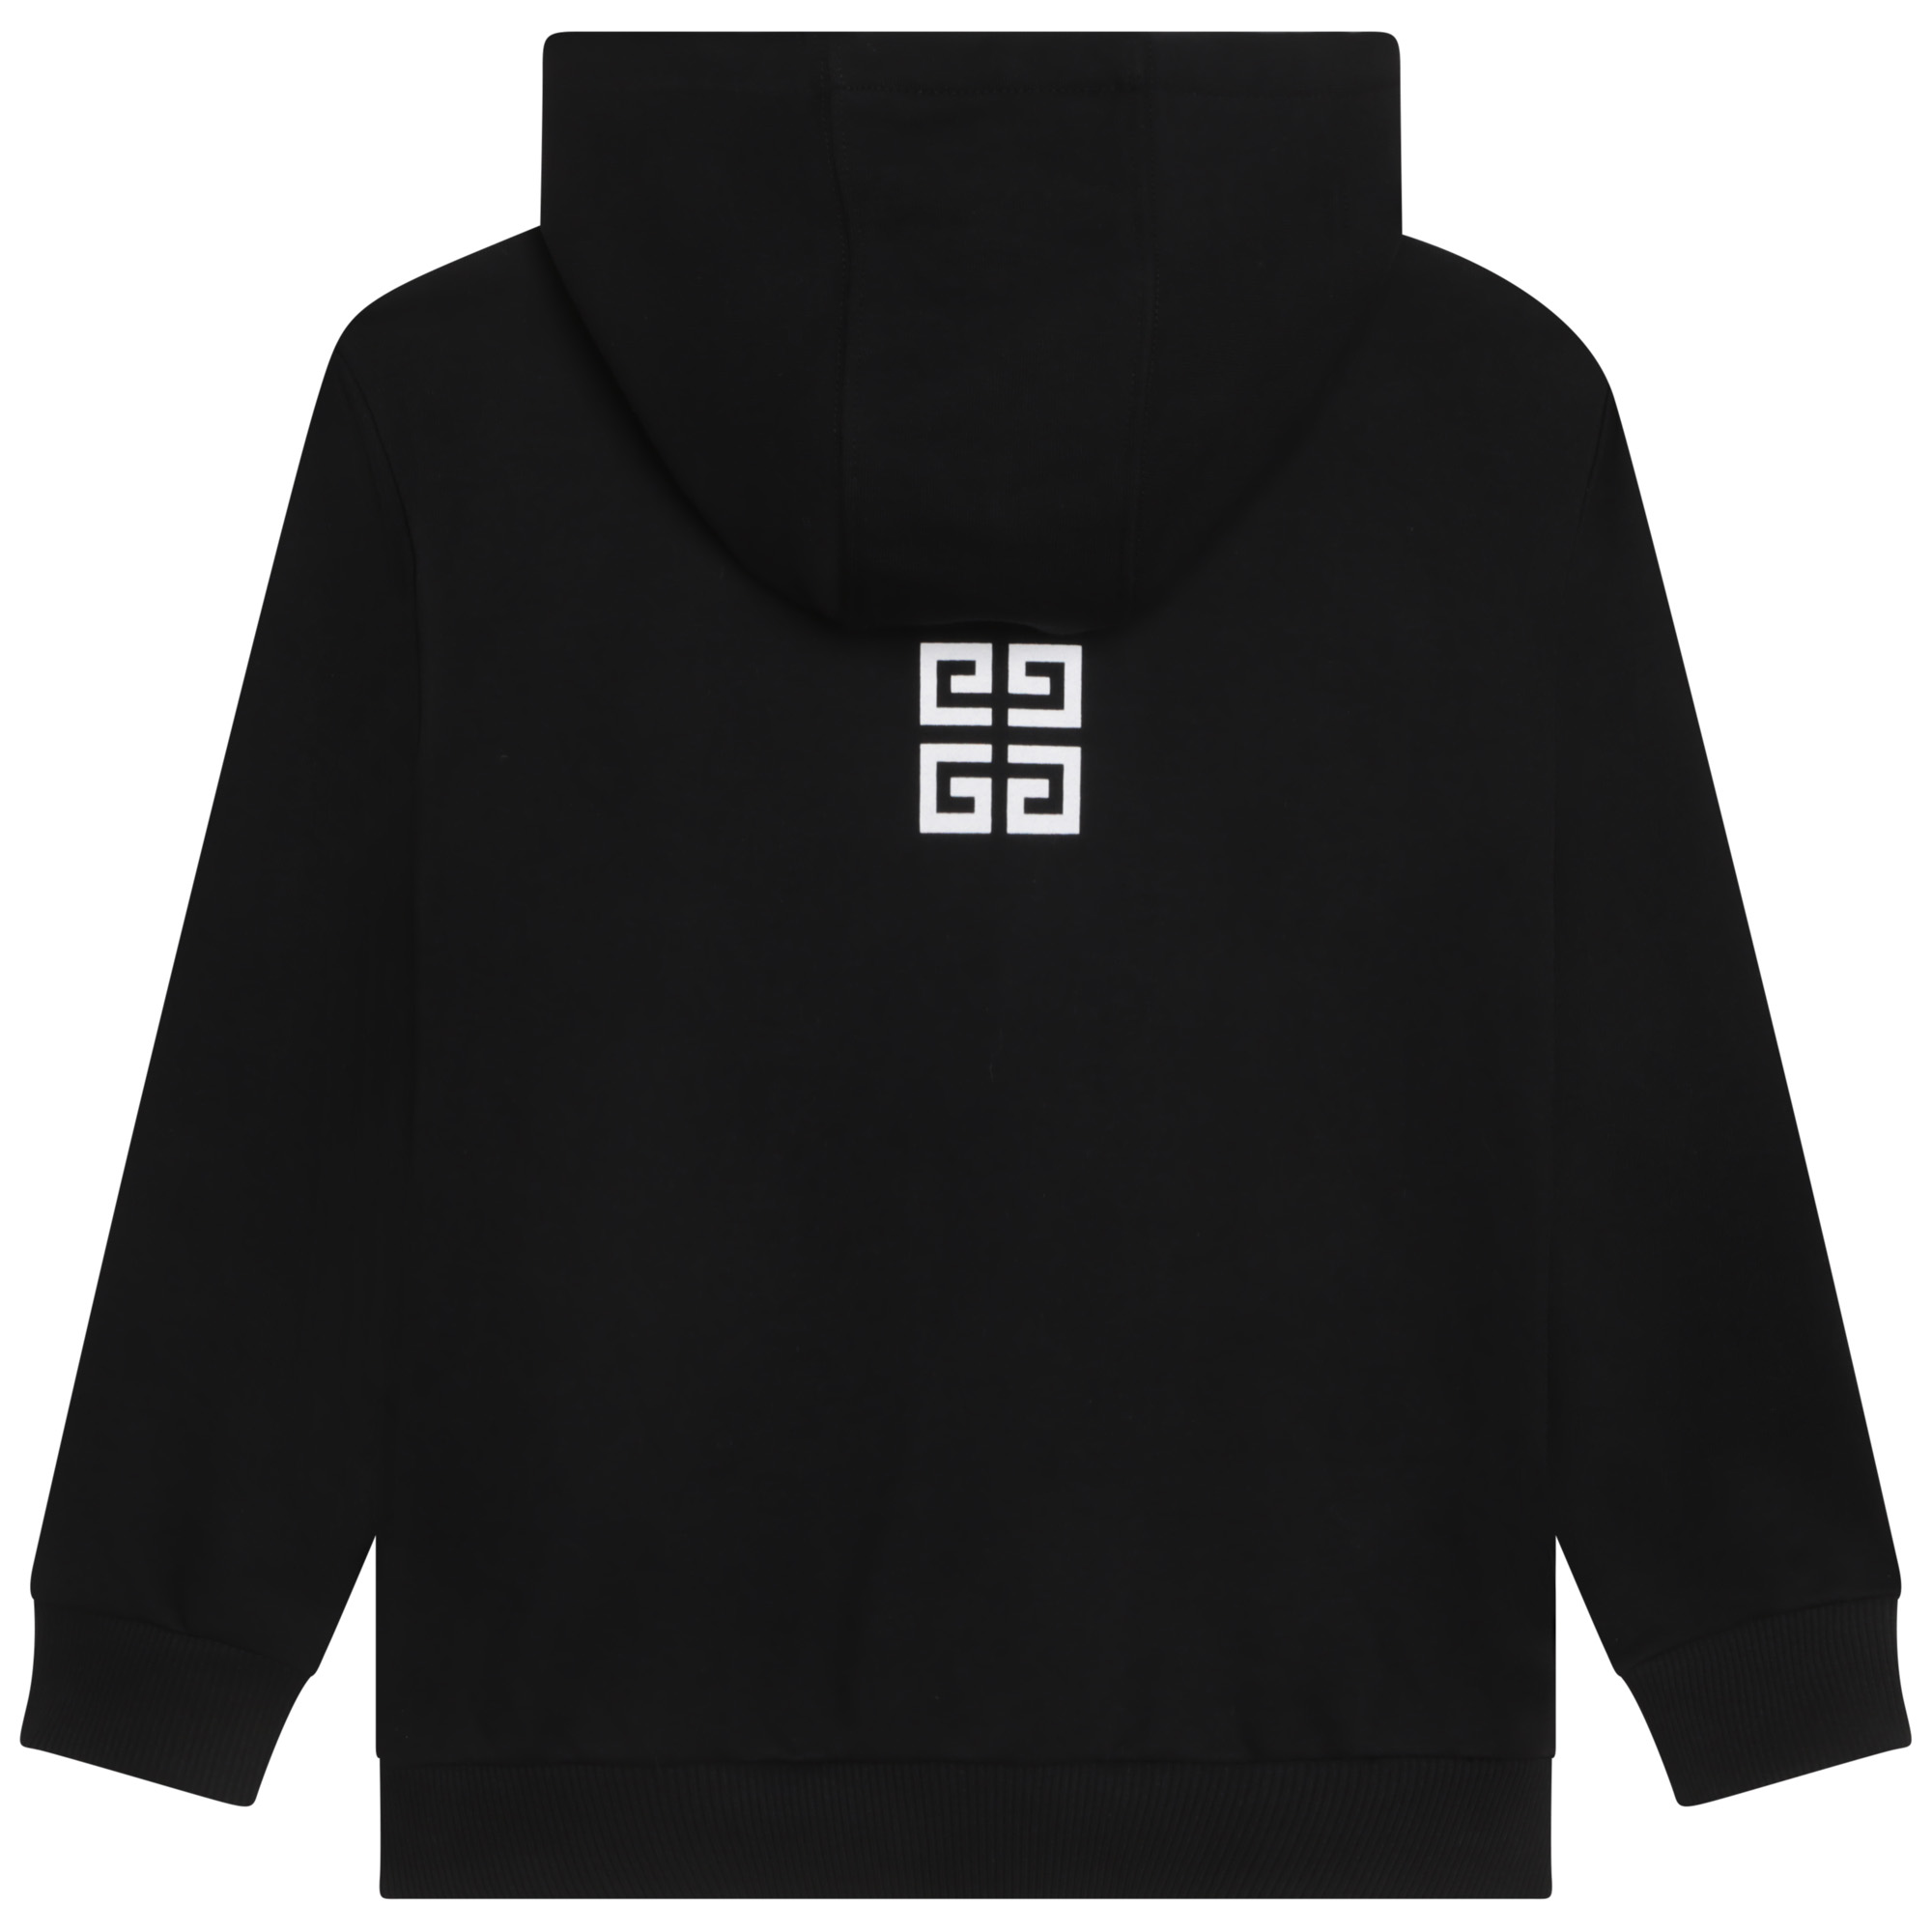 Hooded fleece cardigan GIVENCHY for GIRL